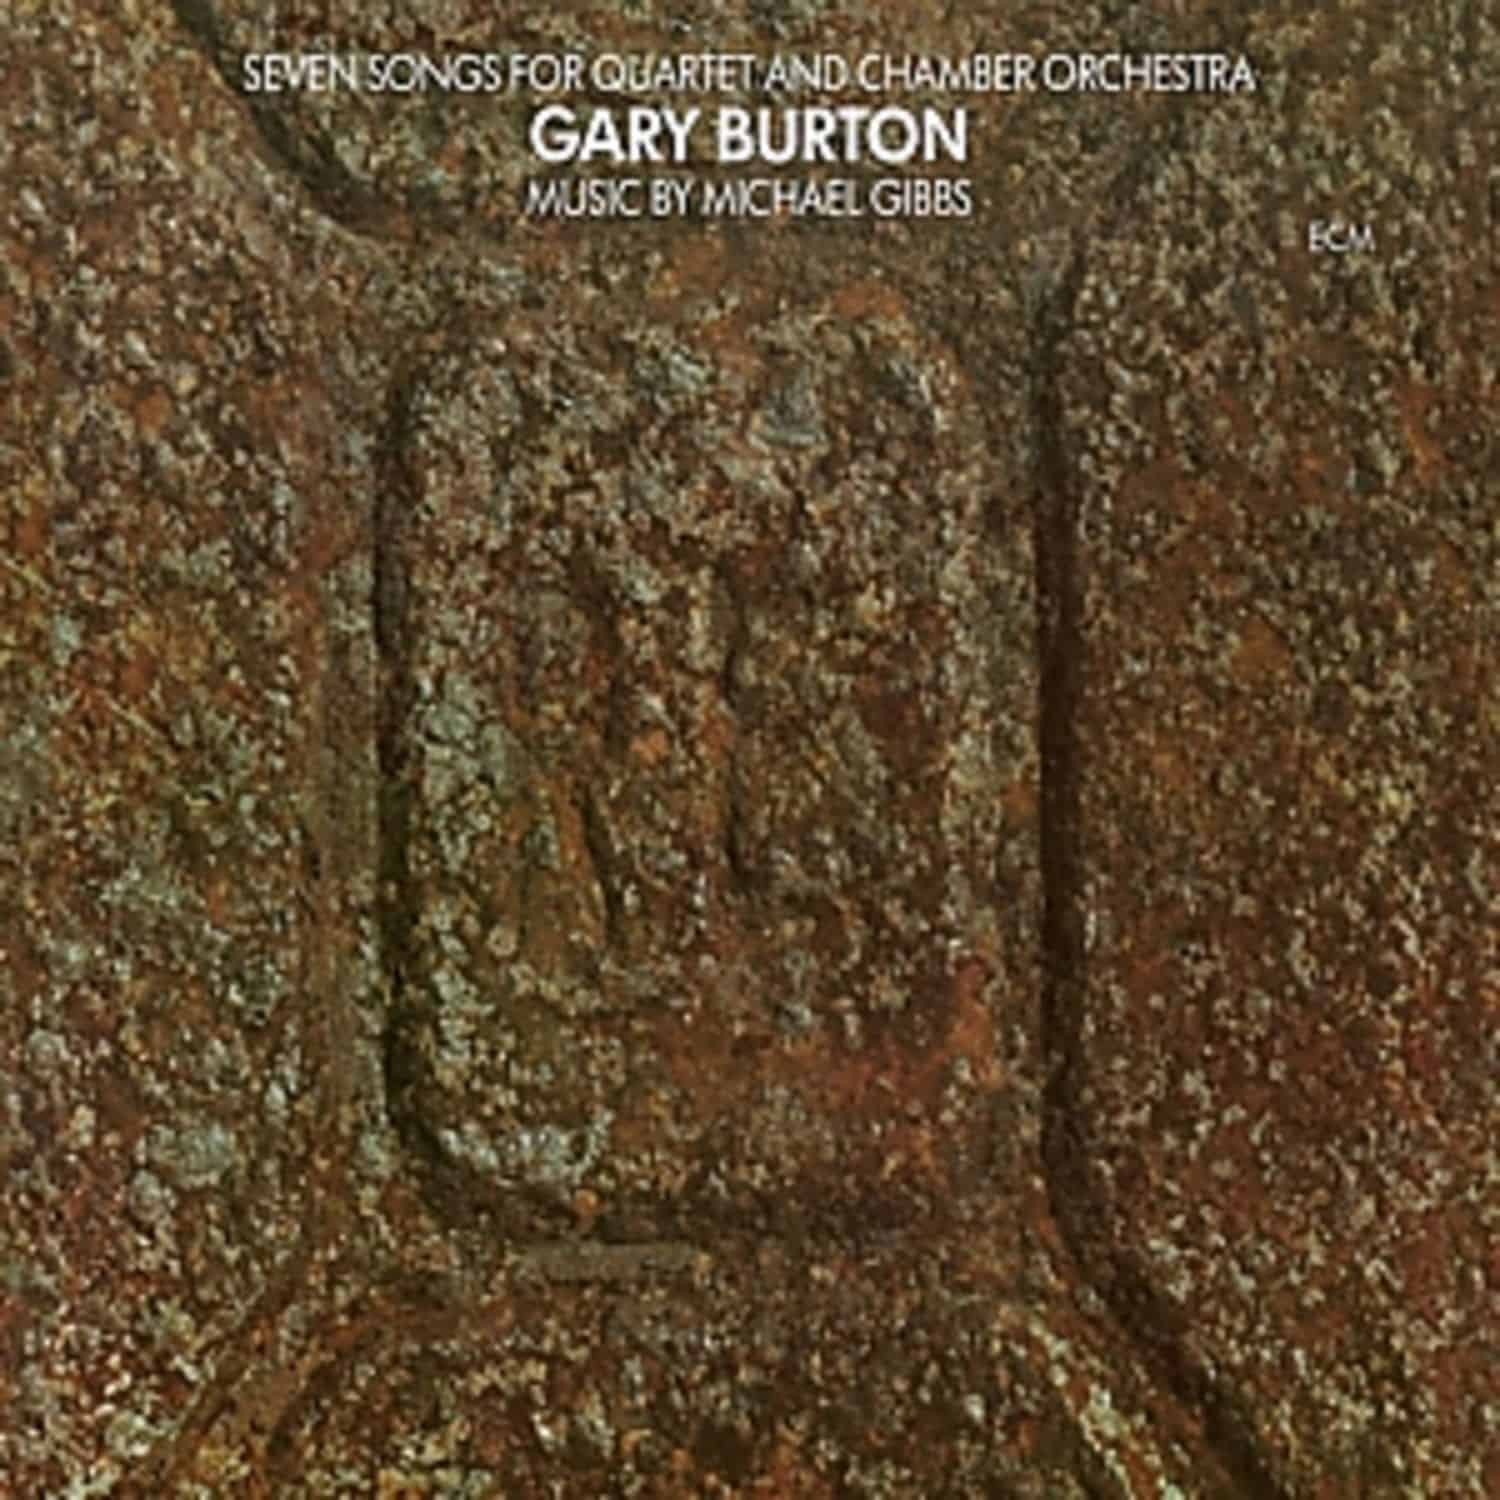 Gary Burton - SEVEN SONGS FOR QUARTET AND CHAMBER ORCHESTRA 